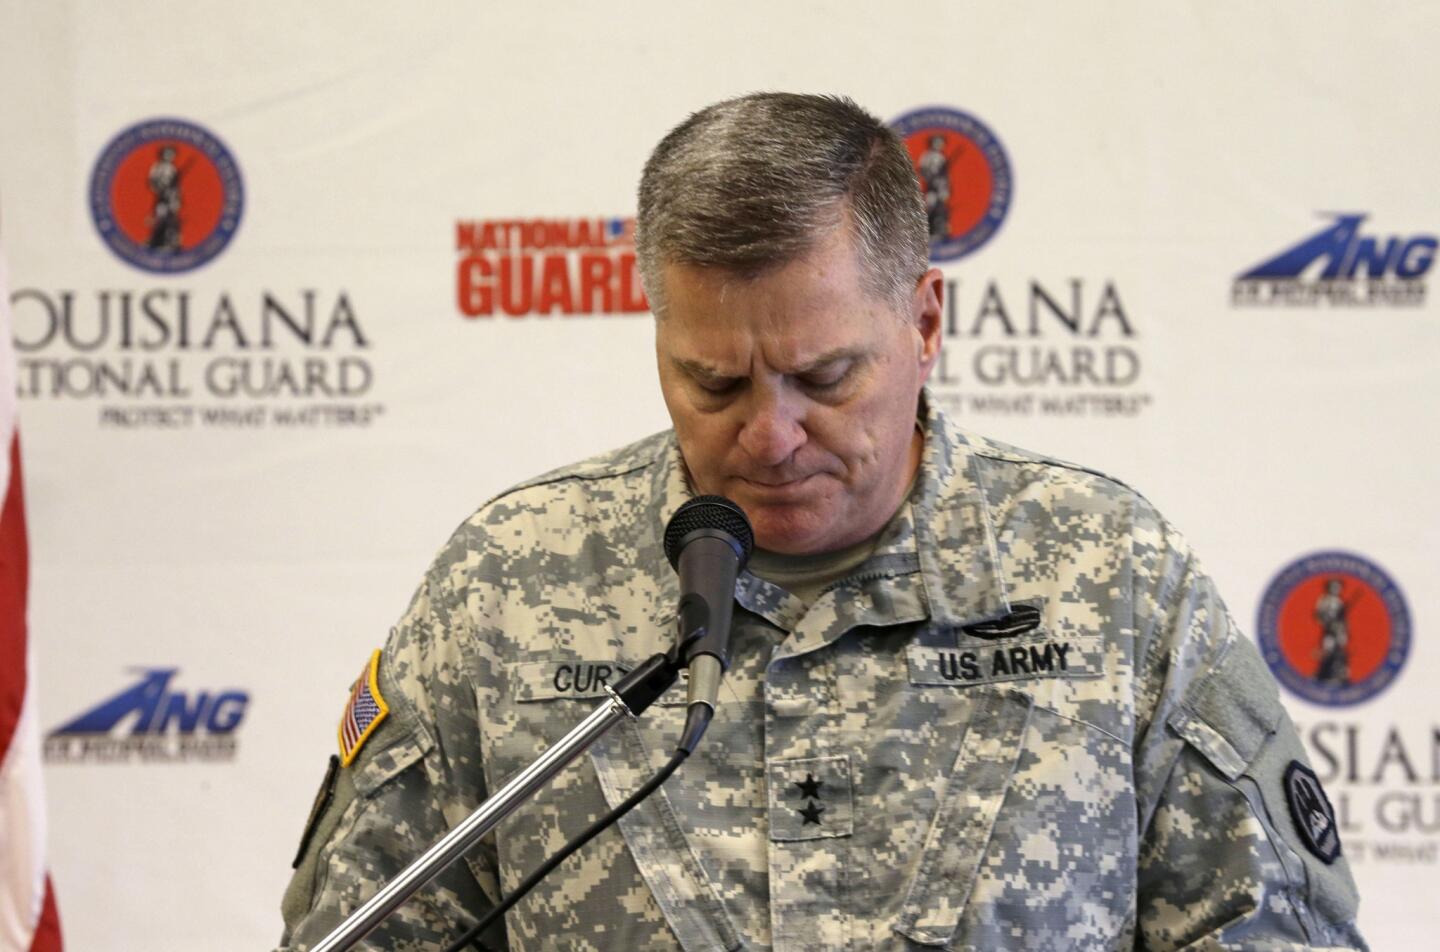 Louisiana National Guard Major General Glenn Curtis speaks at a news conference regarding the crash of a military helicopter, in Hammond, La., Wednesday, March 11, 2015. Two helicopters flew in the nighttime training mission that cost the lives of seven Marines and four soldiers, but one turned back in the dense fog, military officials said.